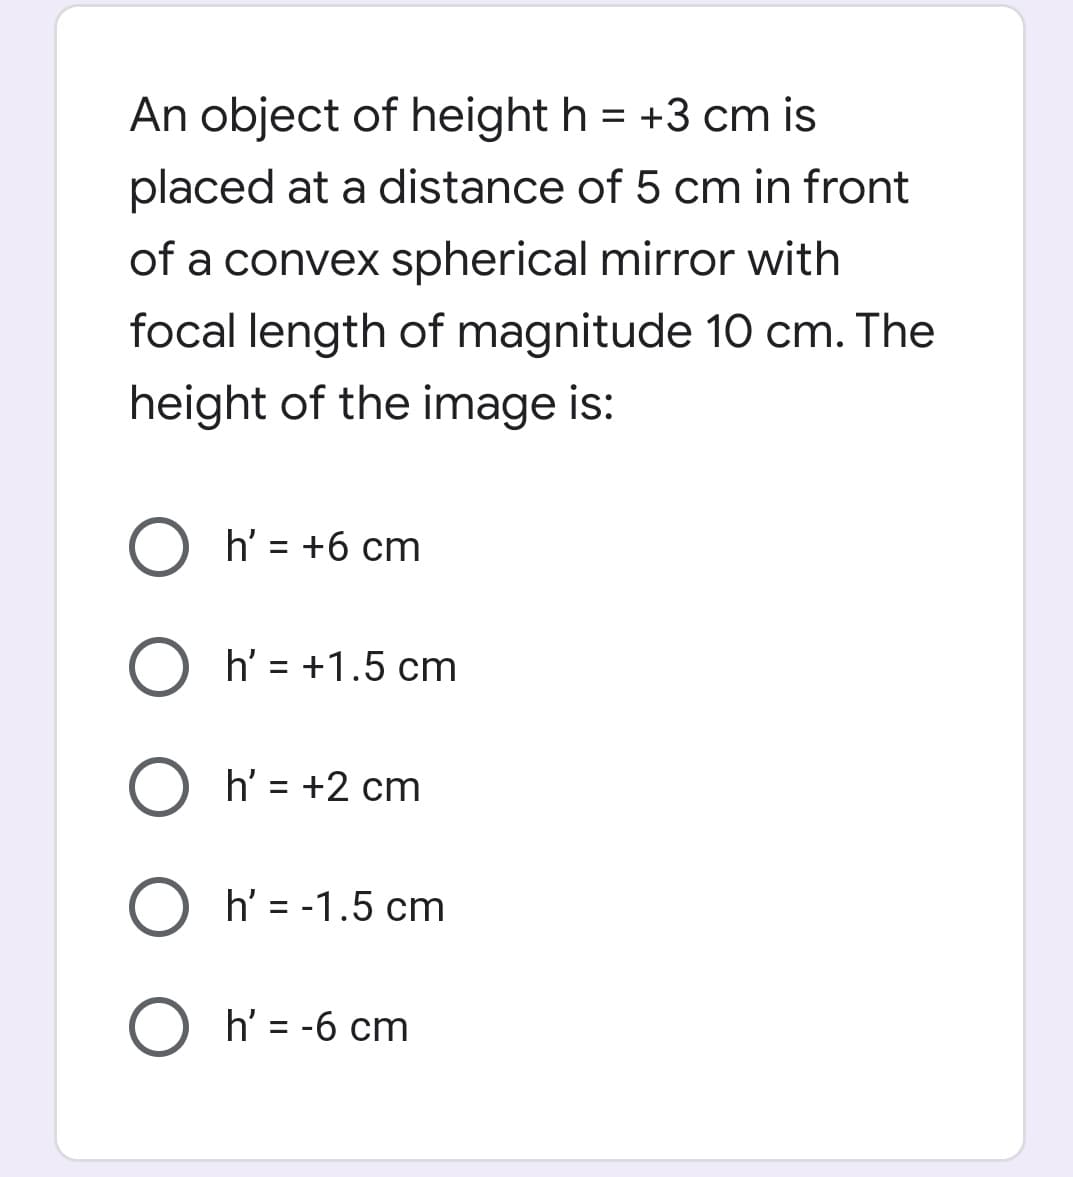 An object of height h = +3 cm is
placed at a distance of 5 cm in front
of a convex spherical mirror with
focal length of magnitude 10 cm. The
height of the image is:
O h' = +6 cm
%3D
O h' = +1.5 cm
h' = +2 cm
h' = -1.5 cm
O h' = -6 cm
%3D
